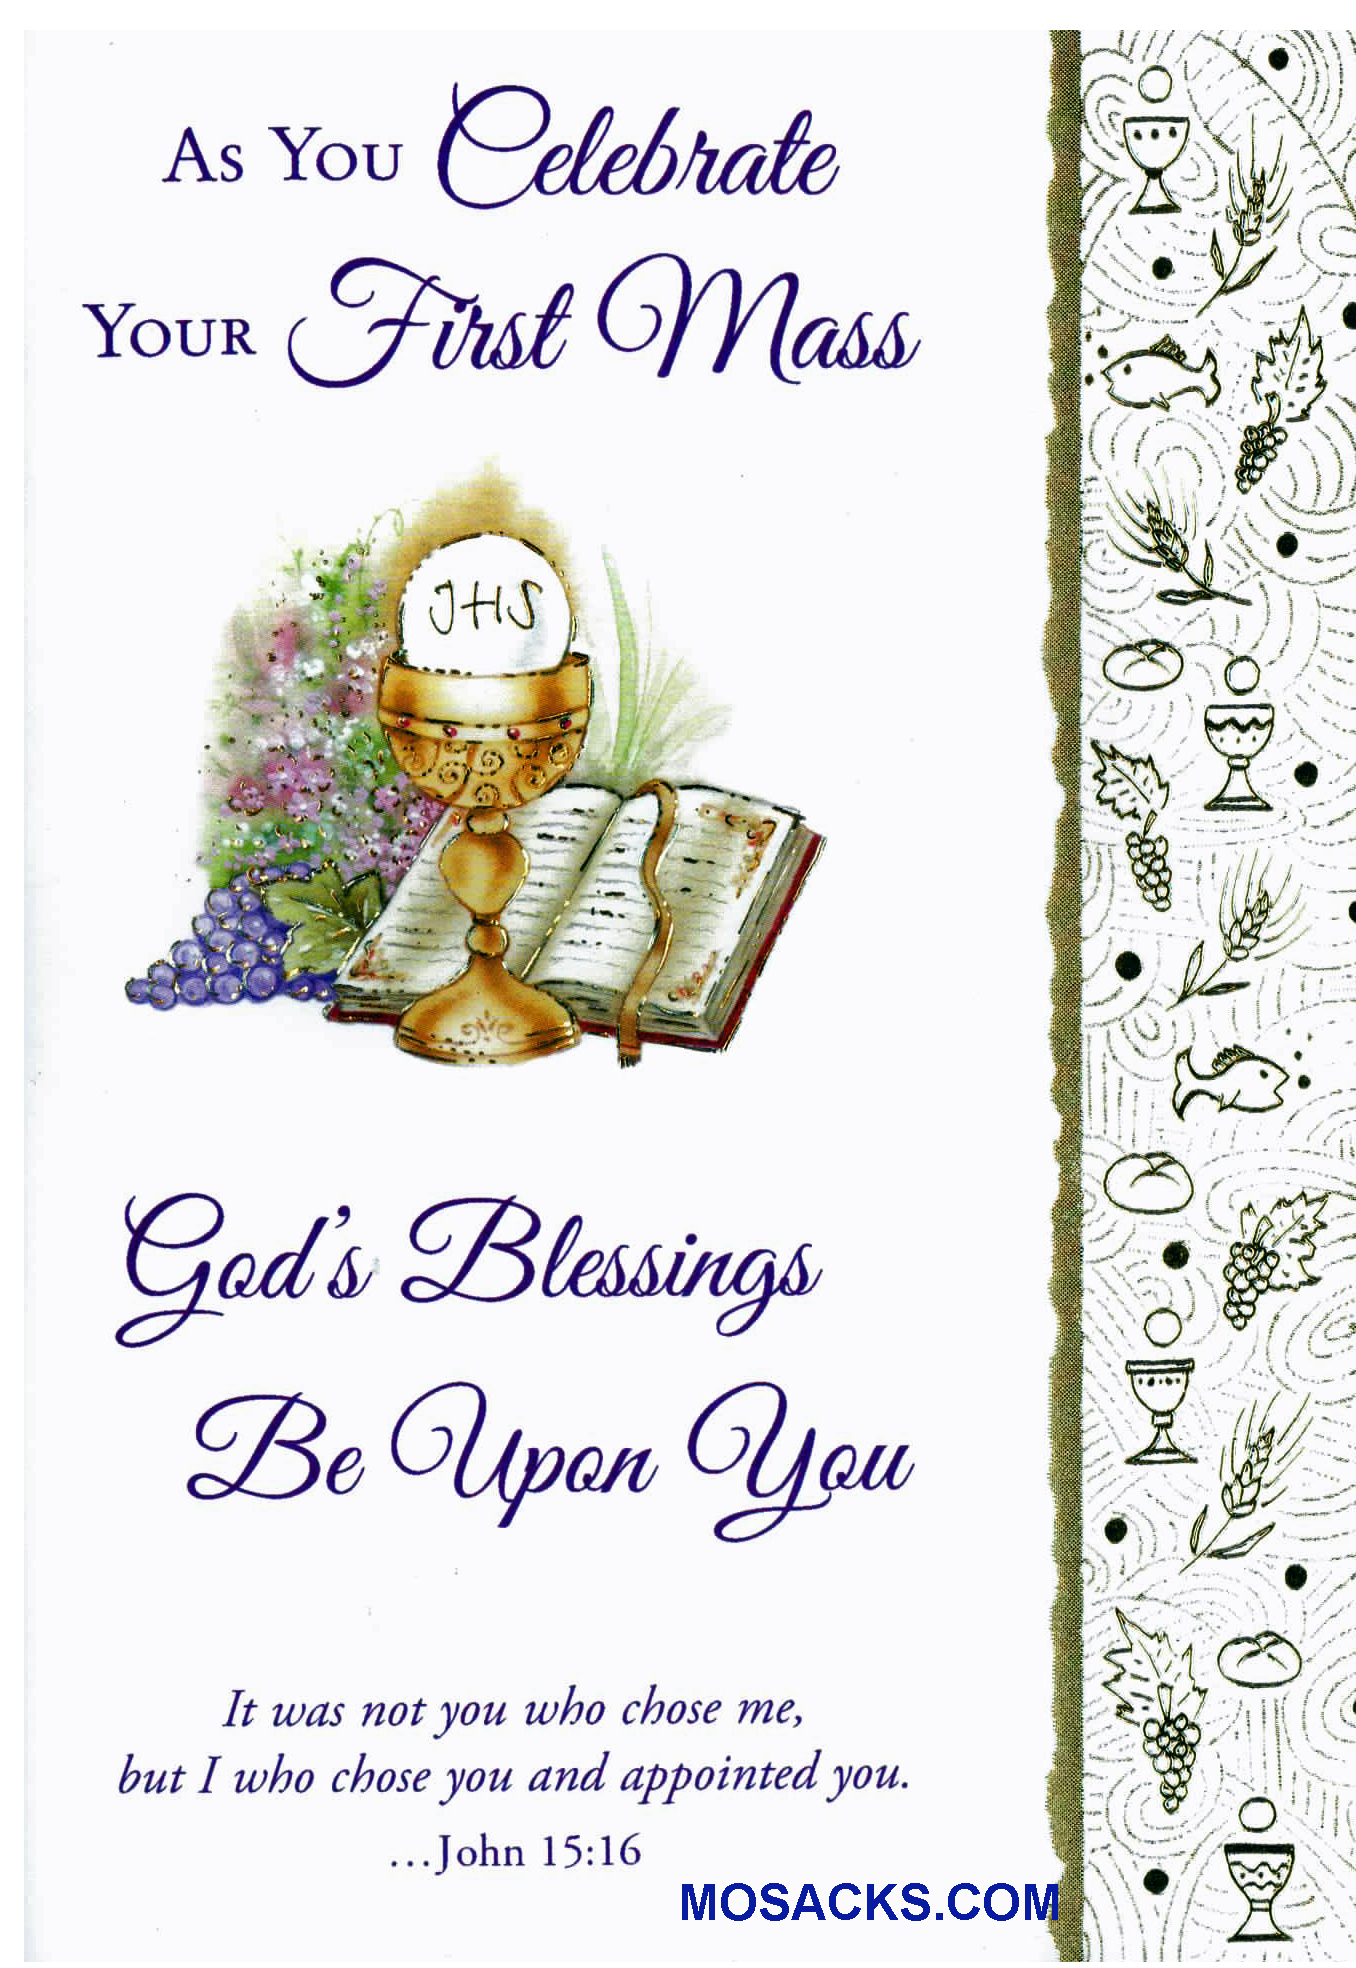 As You Celebrate Your First Mass Greeting Card-MASS87486